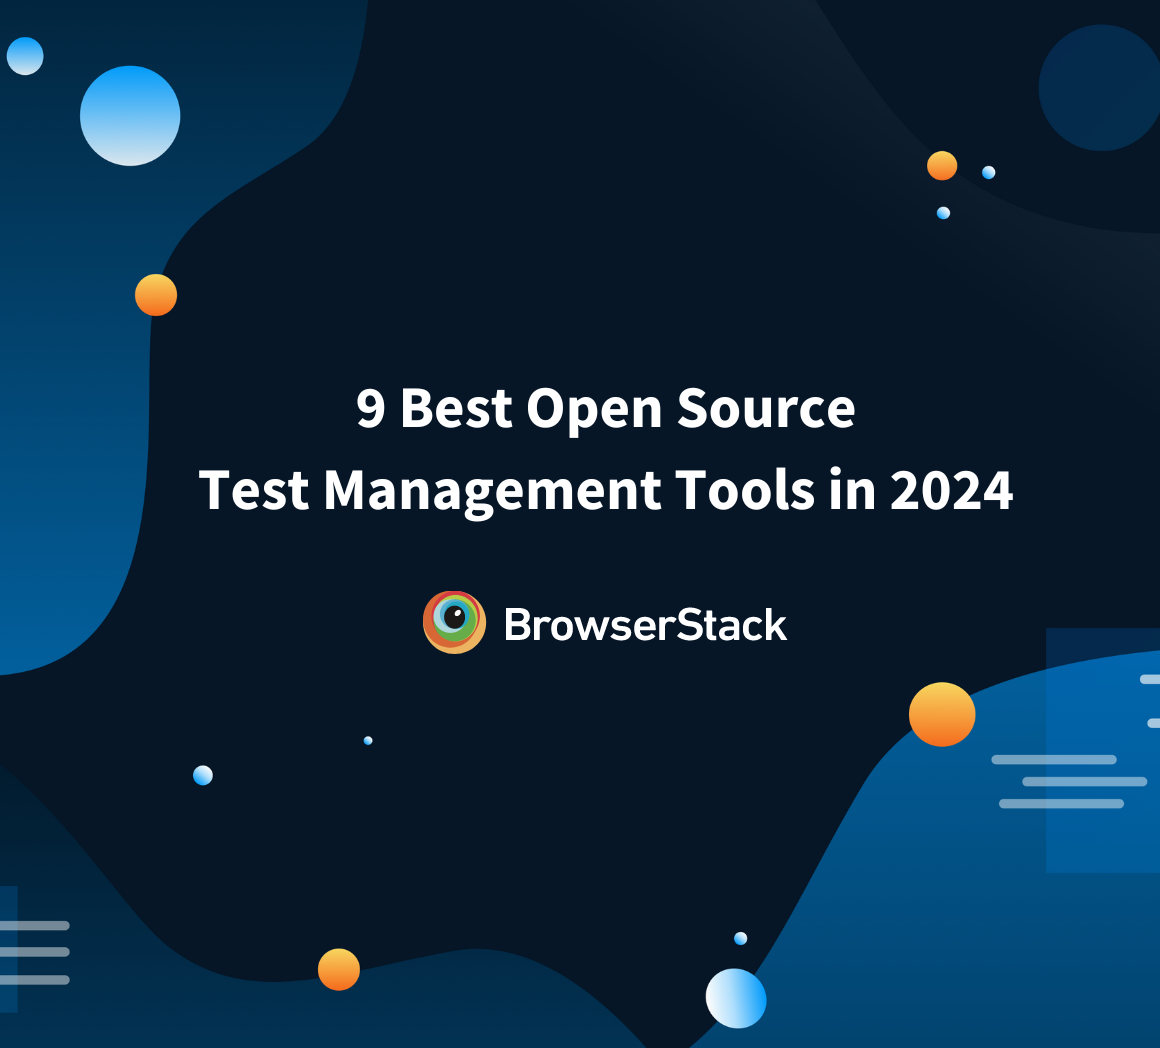 9 Best Open Source Test Management Tools in 2024